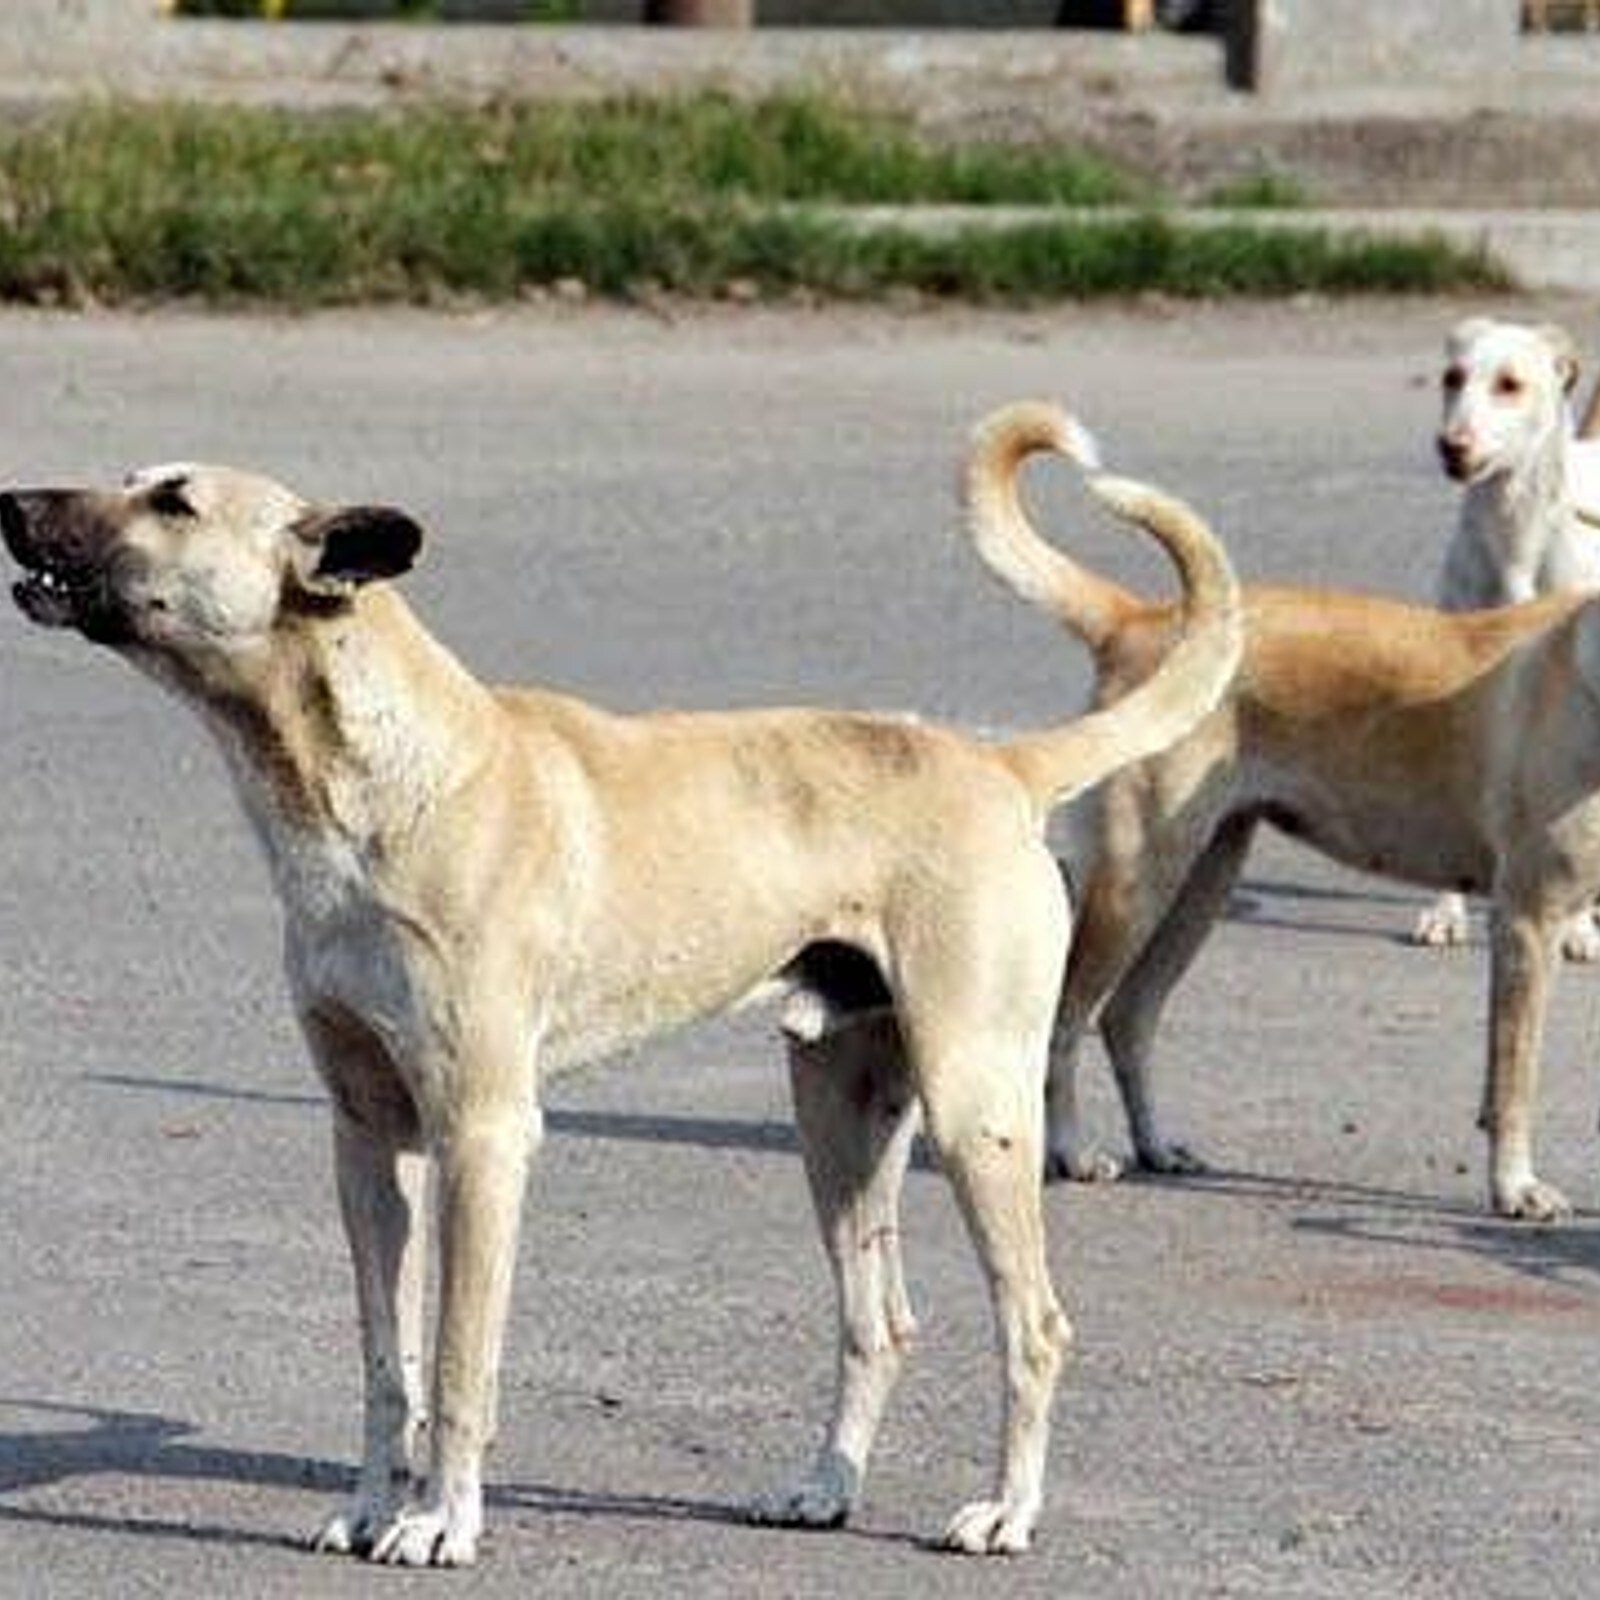 37 Cases, 37 Deaths: How The Menace of Rabies Has Gnawed at Tamil Nadu  since Last Year